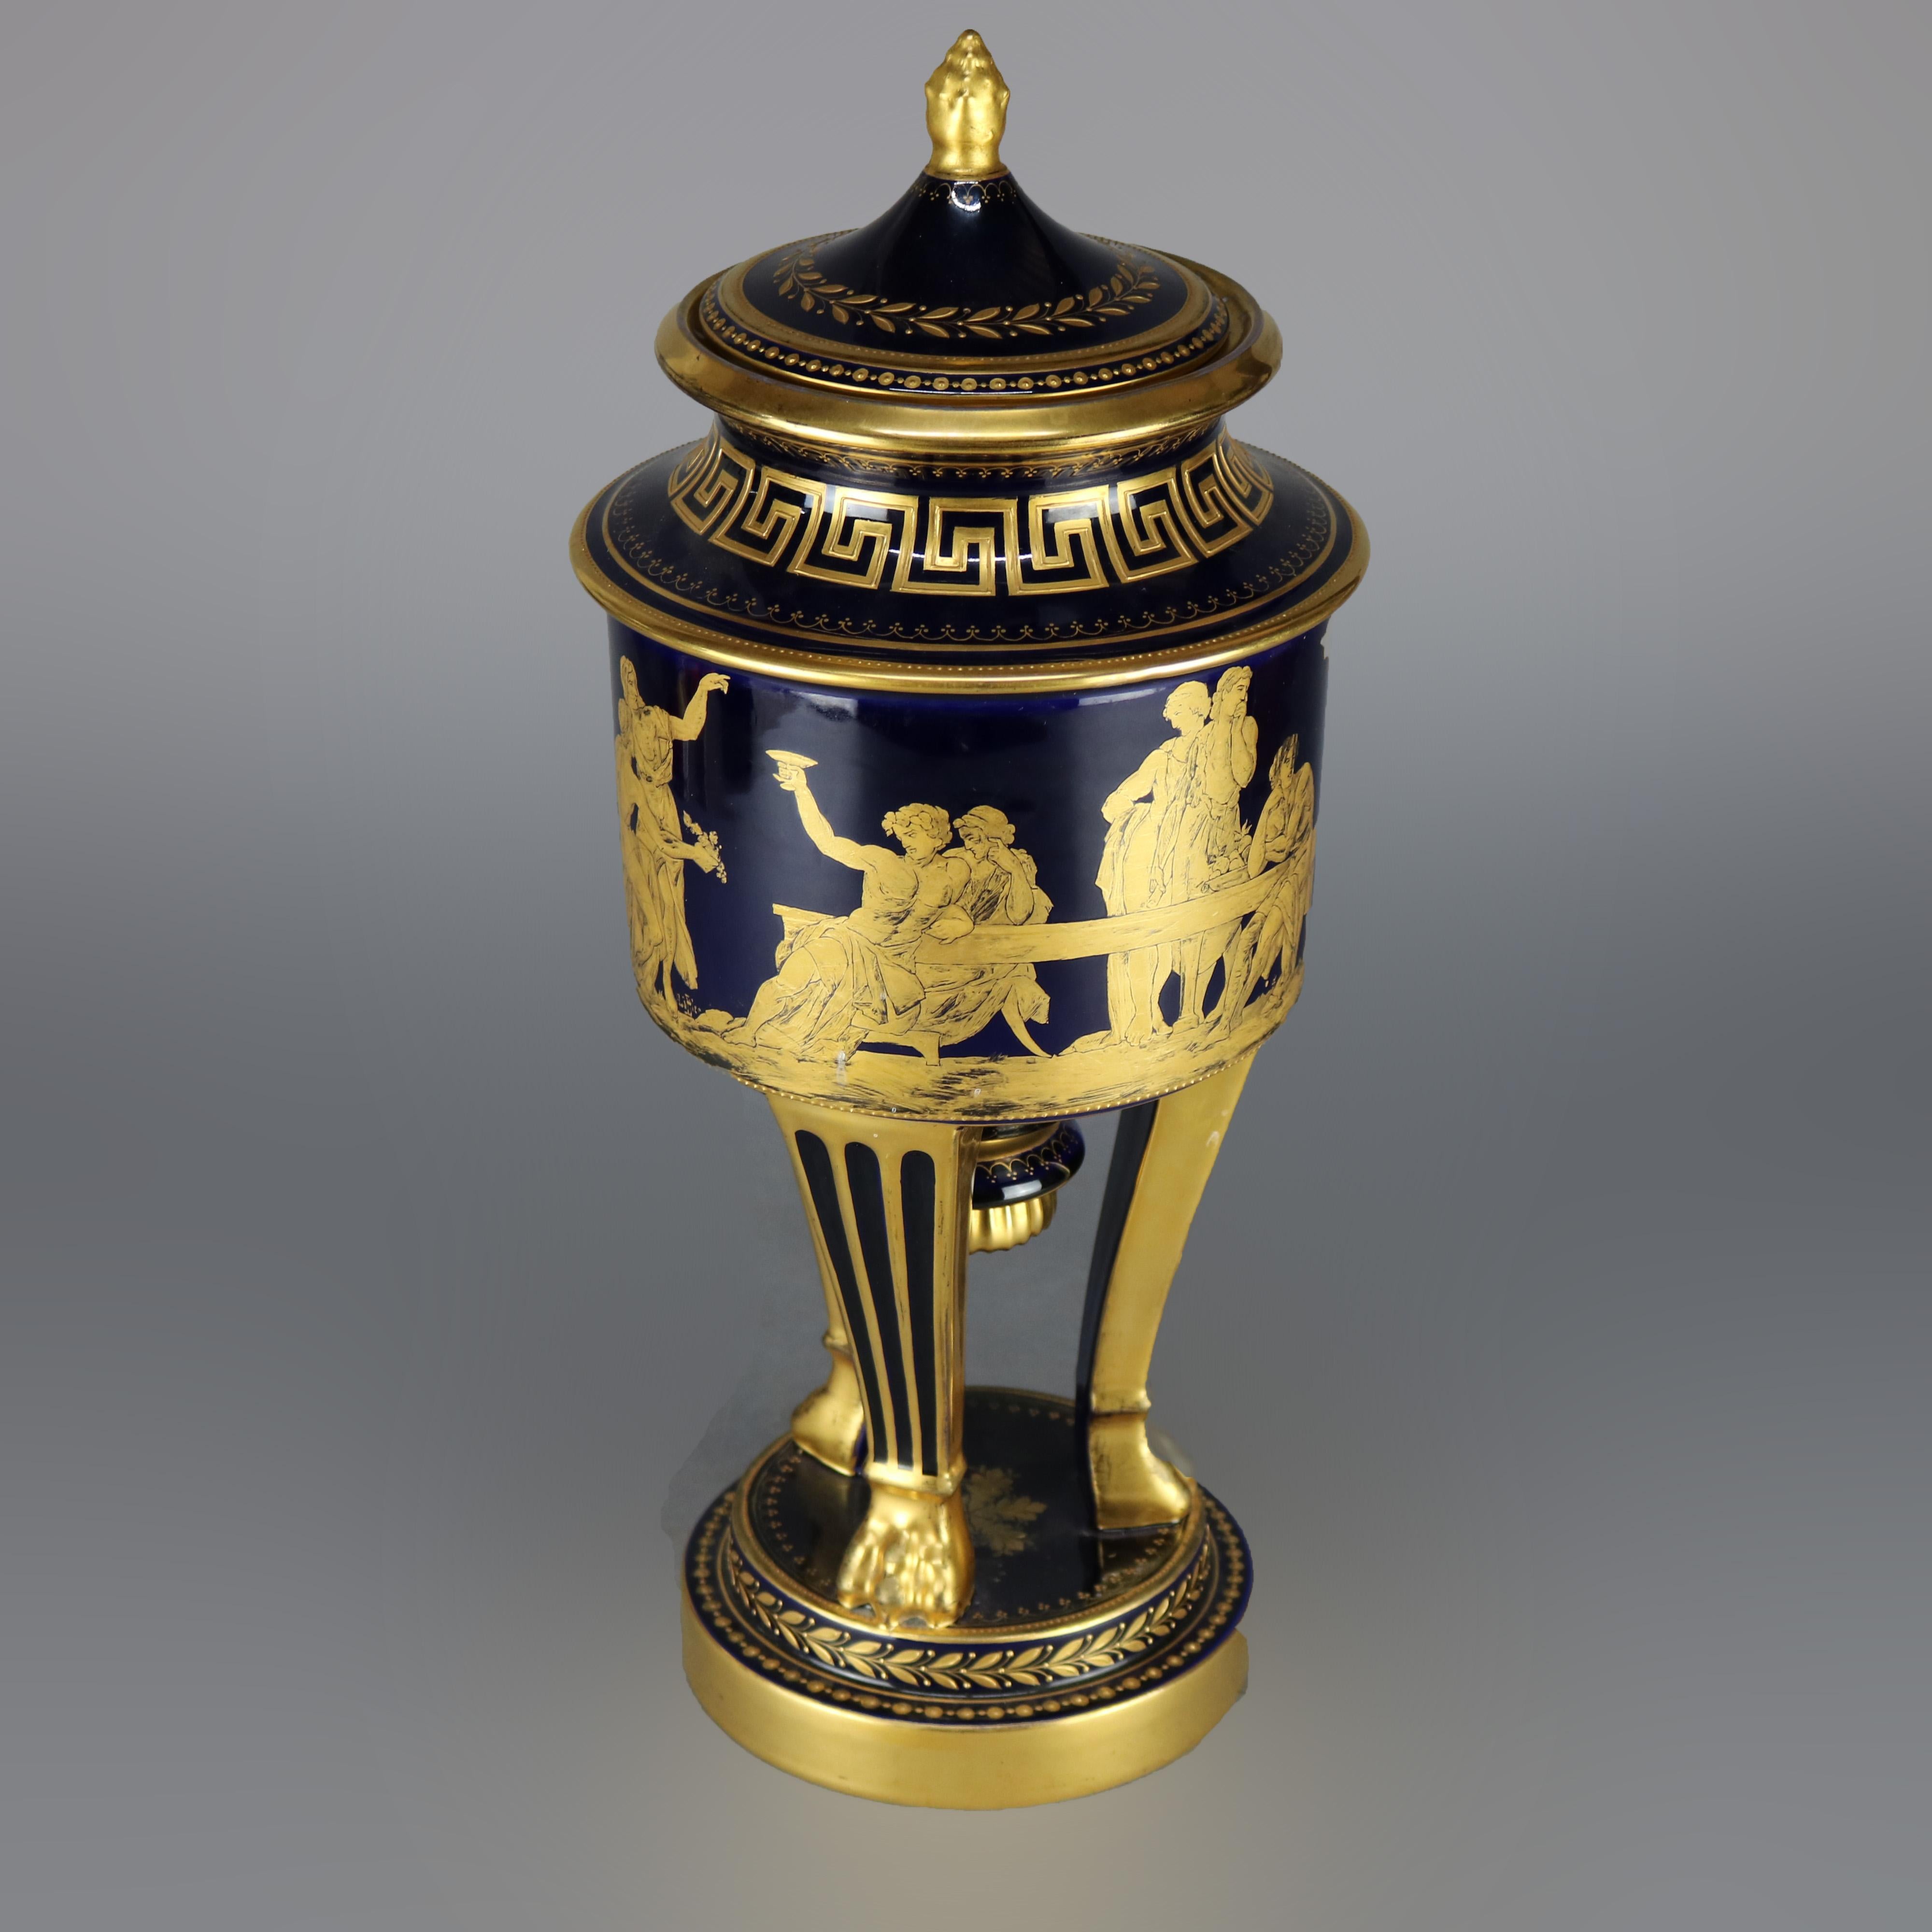 An antique and large French urn in the manner of Sevres offers lidded cobalt vessel with Classical scenes with figures, Greek Key collar and inscription in lip, raised on three gilt legs terminating in paw feet seated on decorated plinth, Schmouis